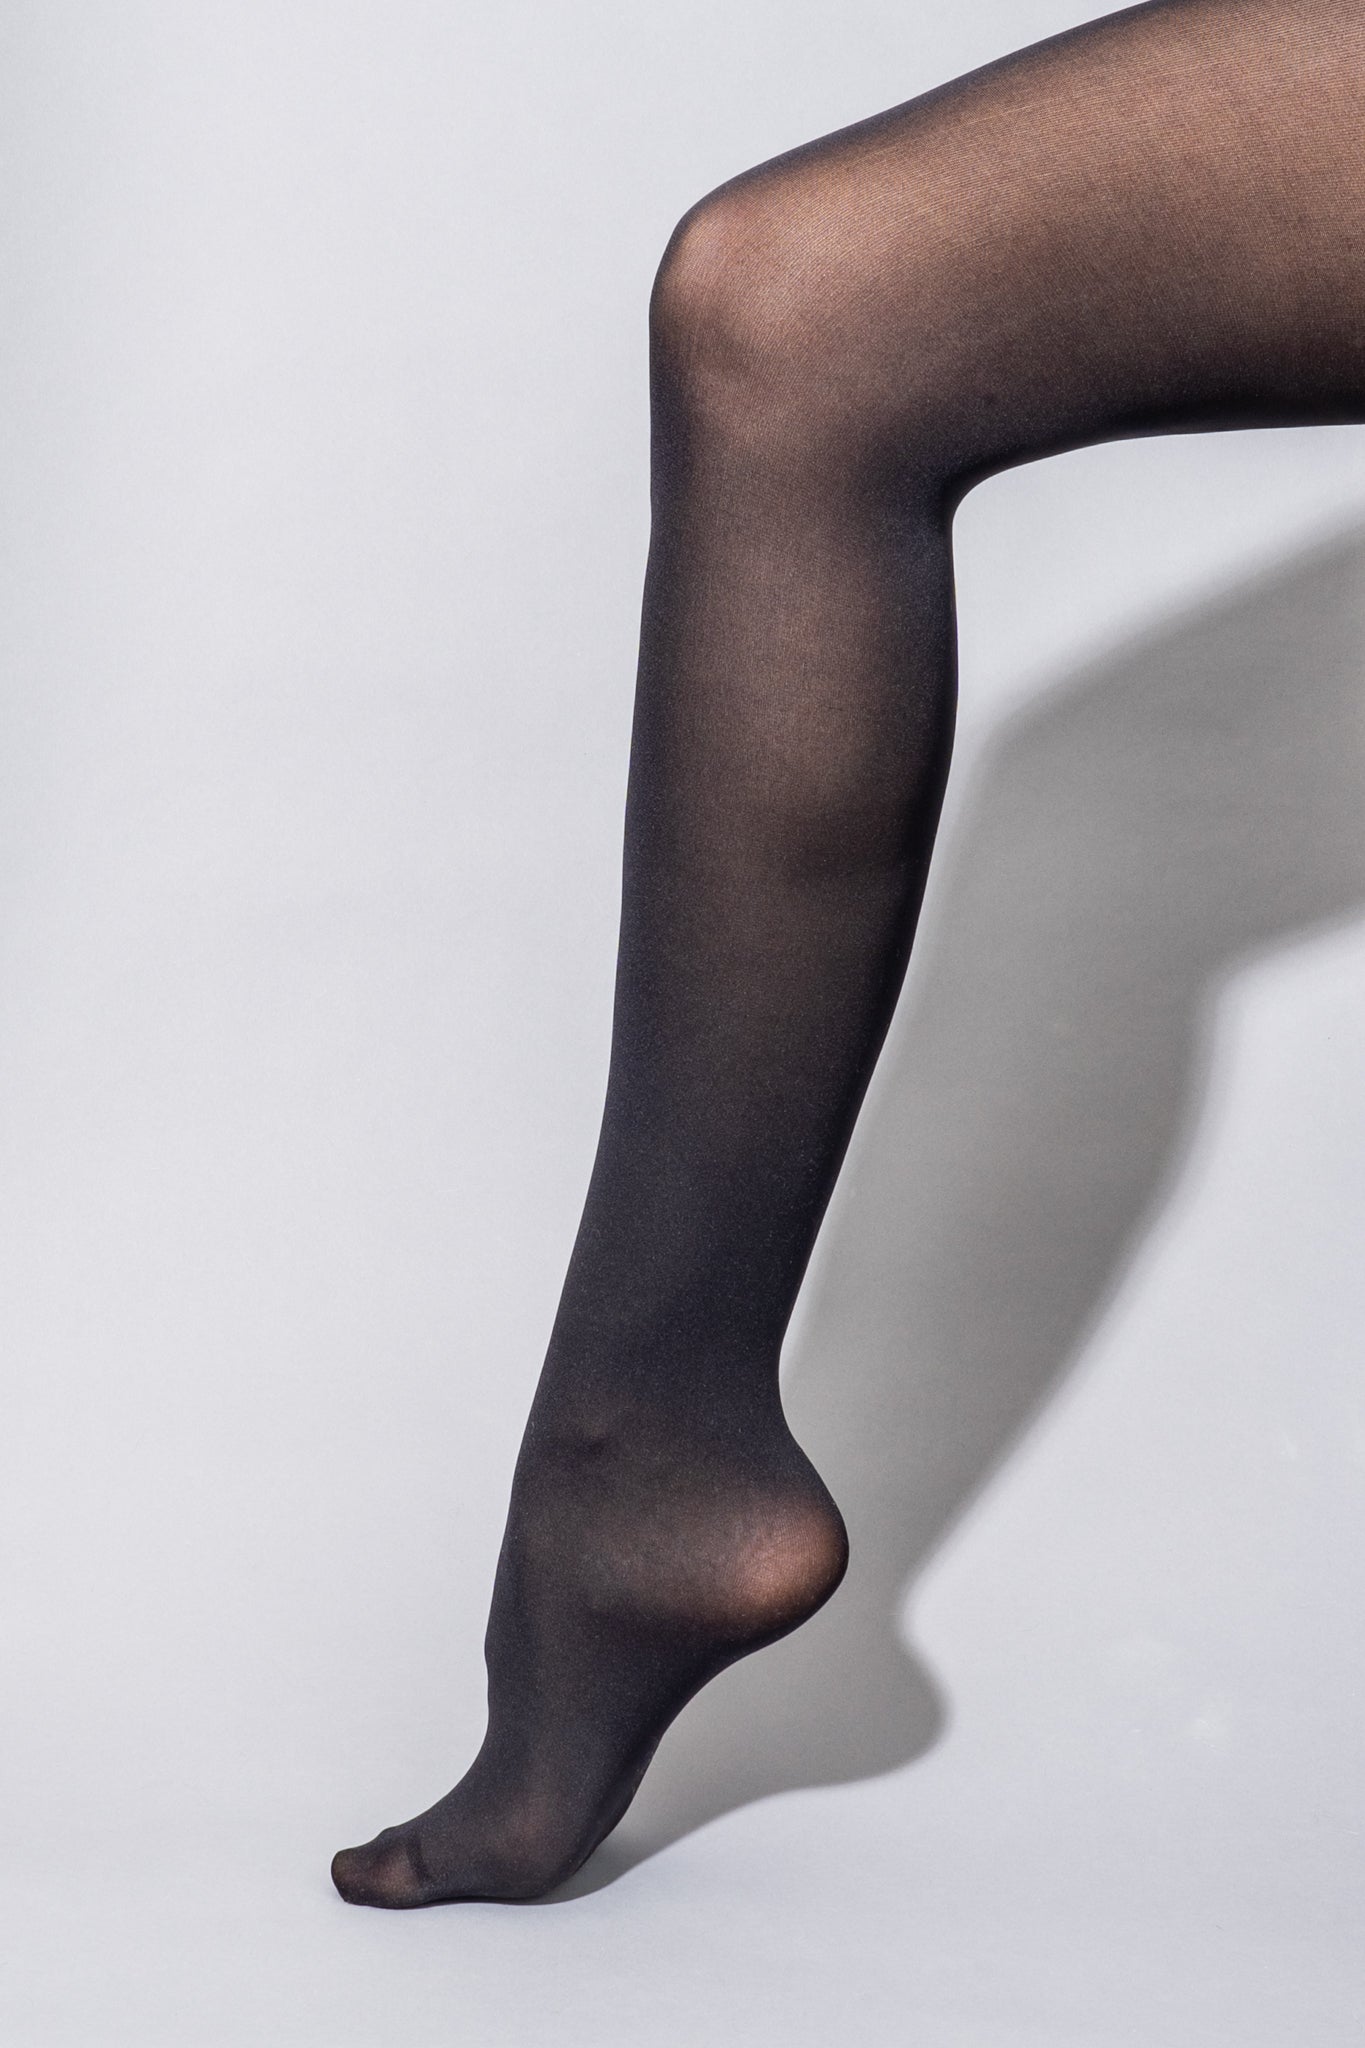 dominic whitaker recommends Best Pantyhose Pics